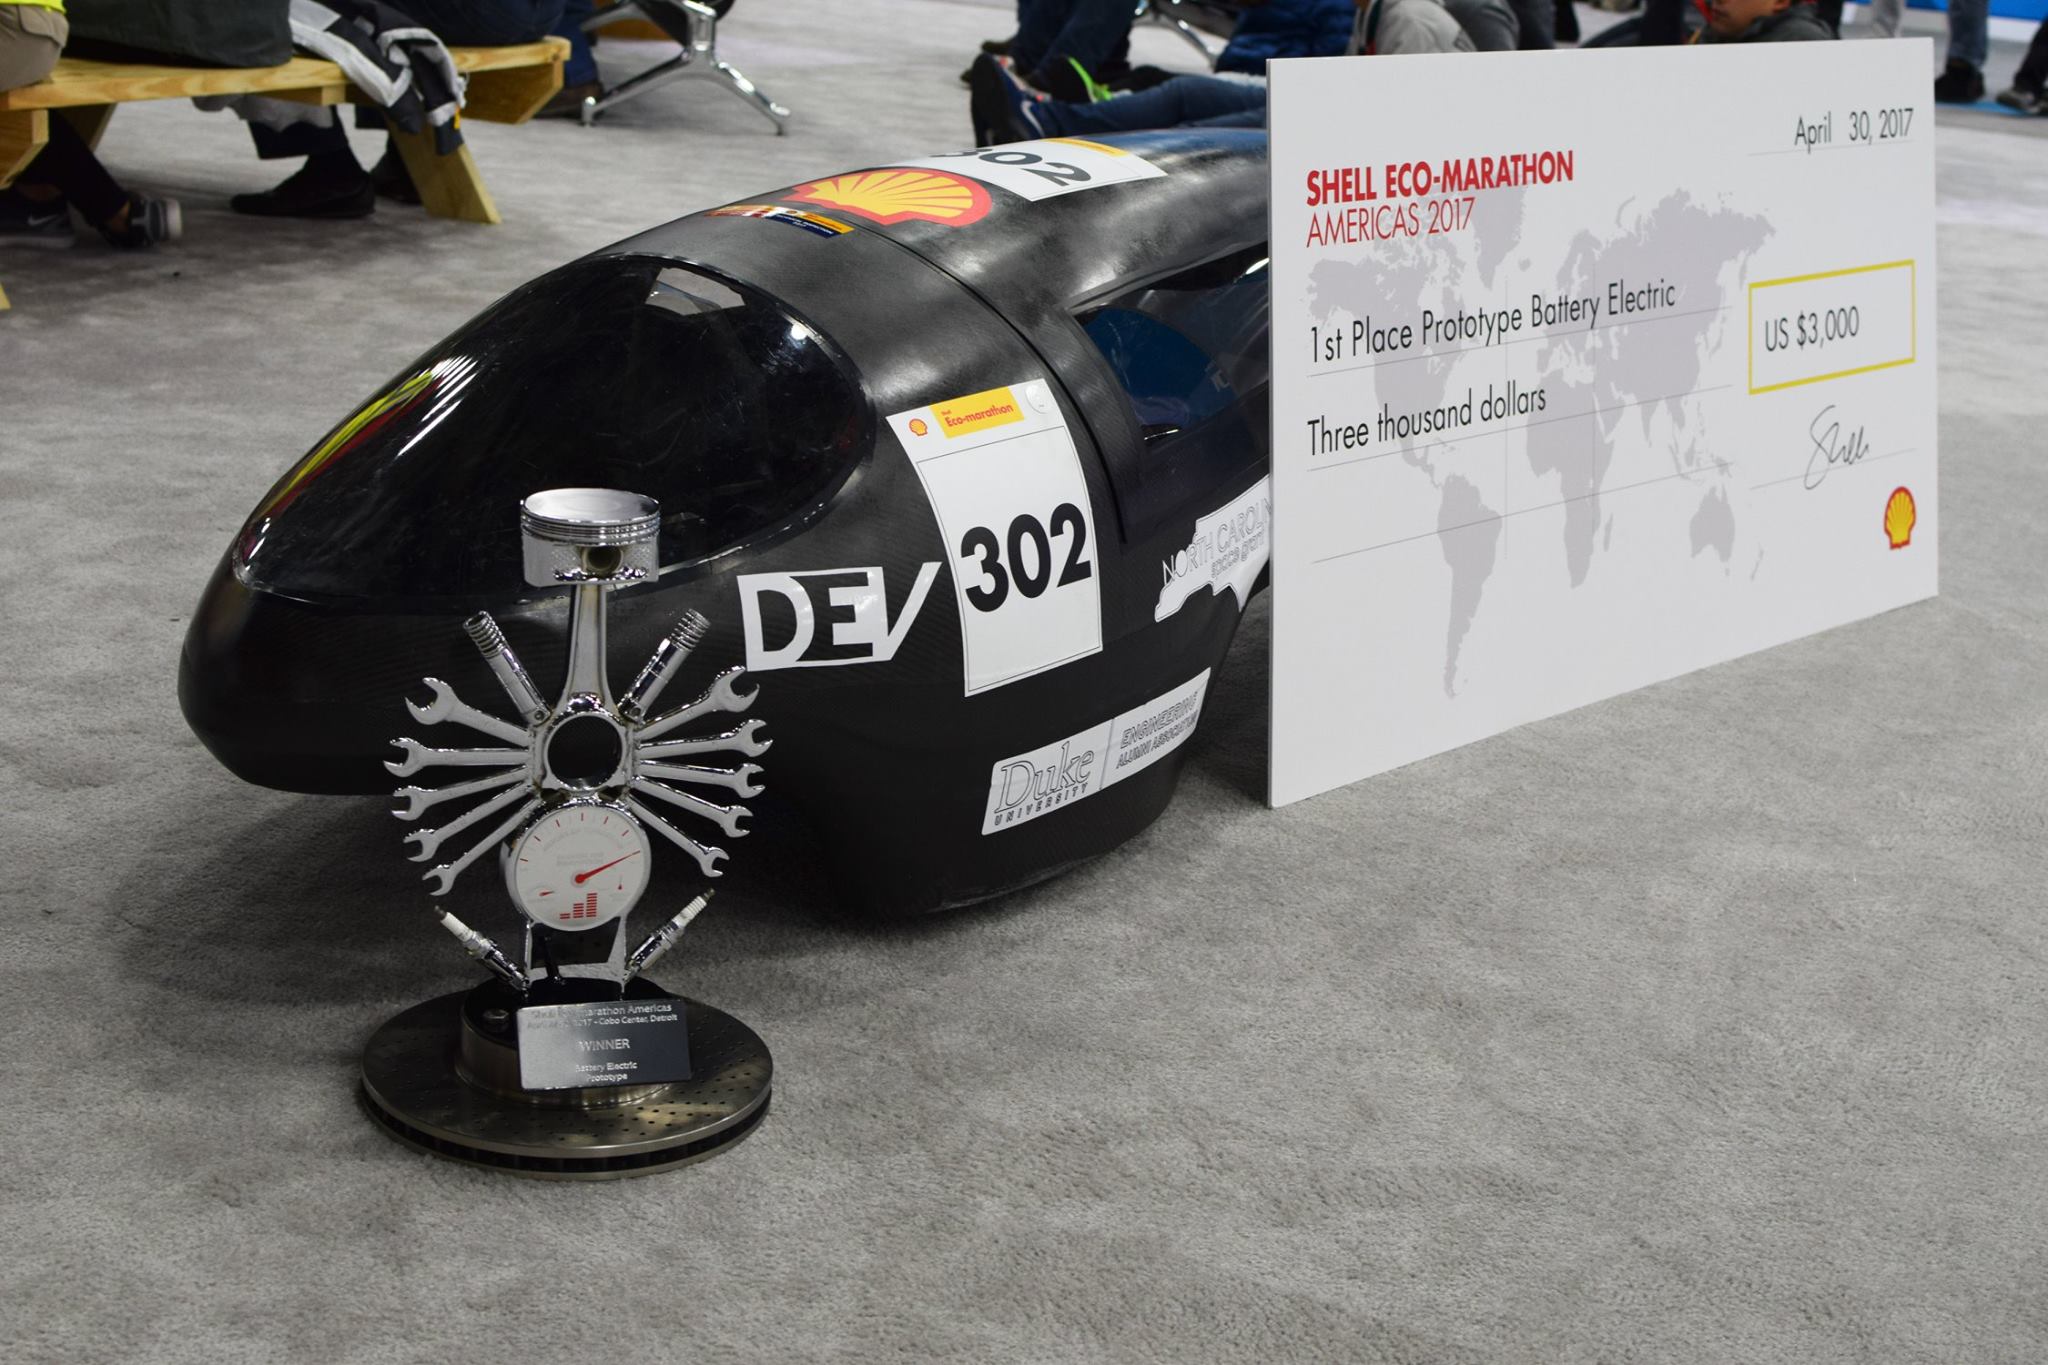 Duke Electric Vehicle Takes First Place at Shell Americas